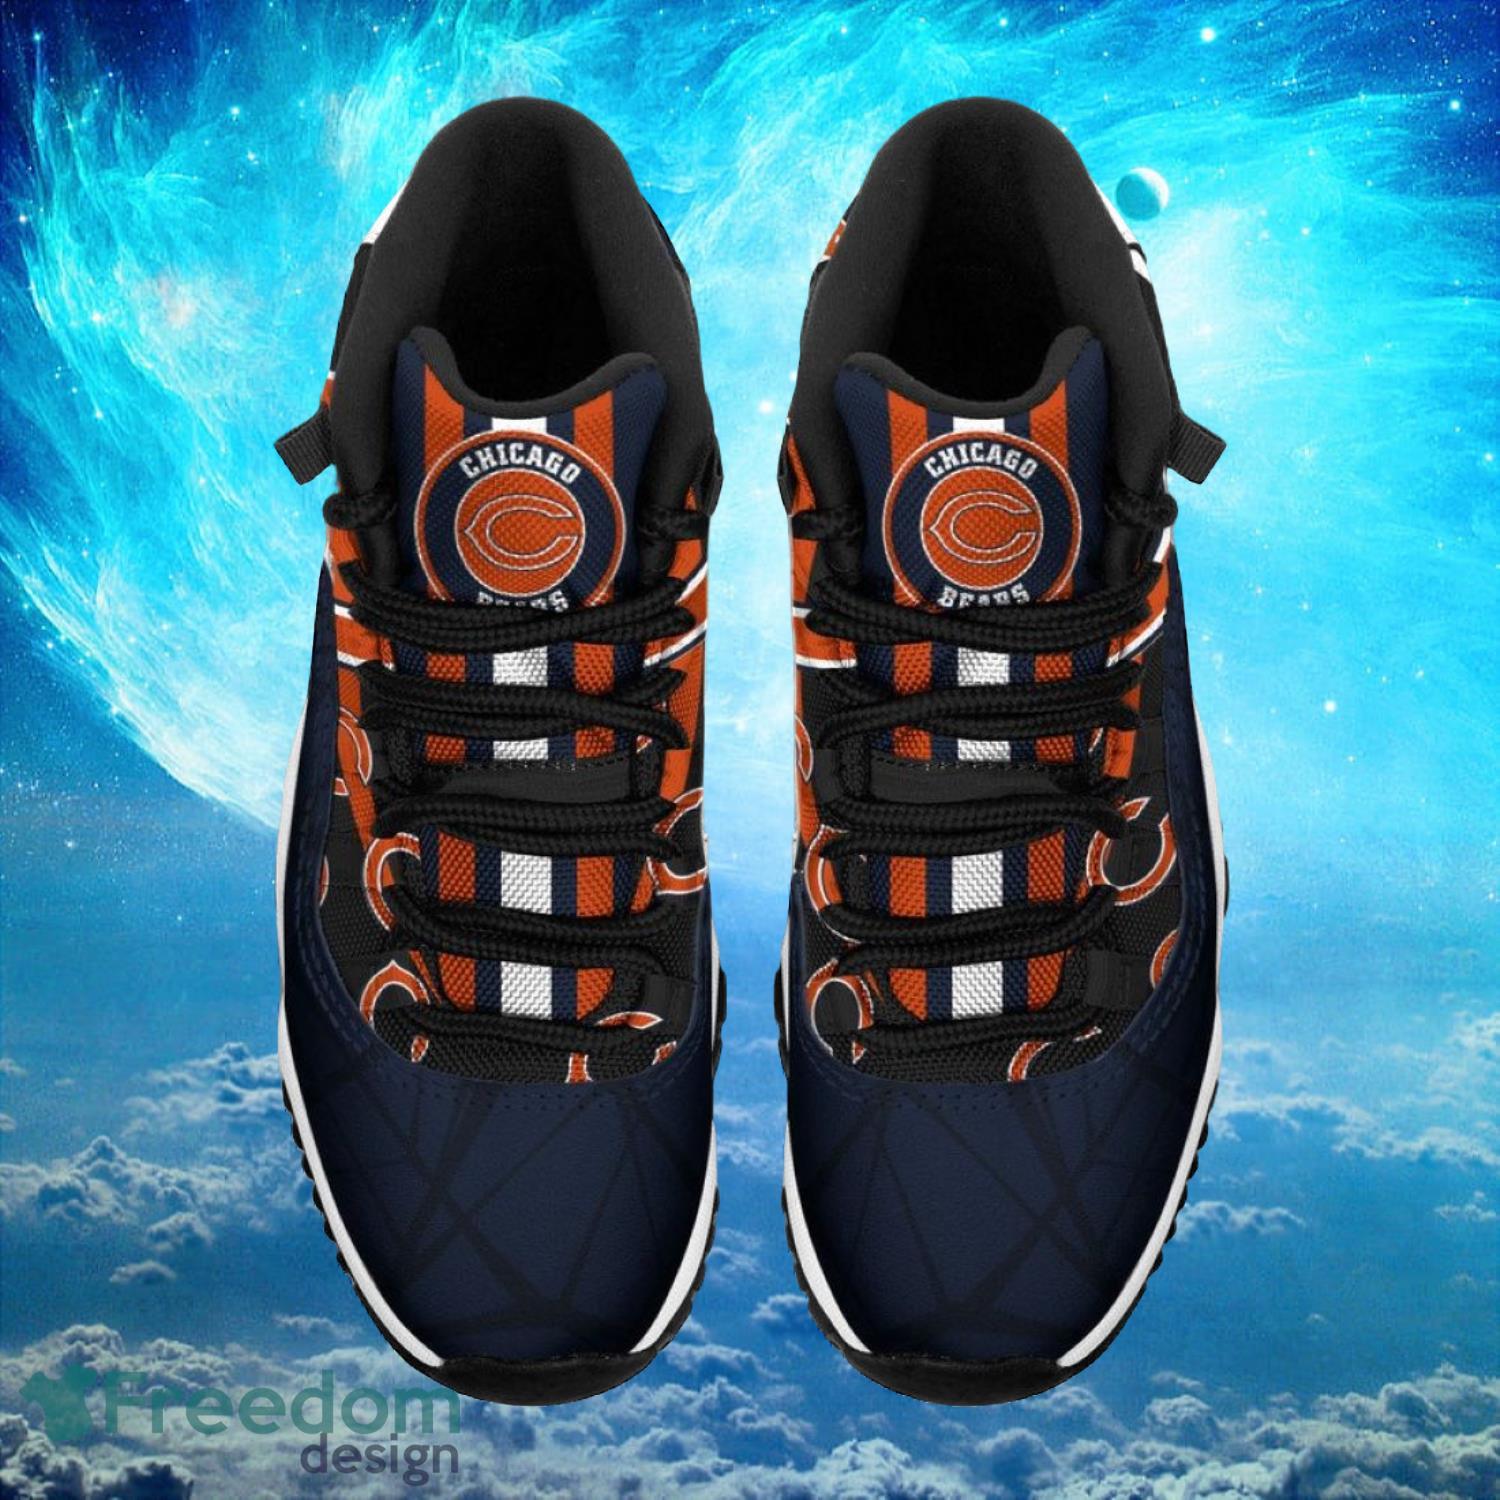 Chicago Bears NFL Air Jordan 11 Sneakers Shoes Gift For Fans Product Photo 2